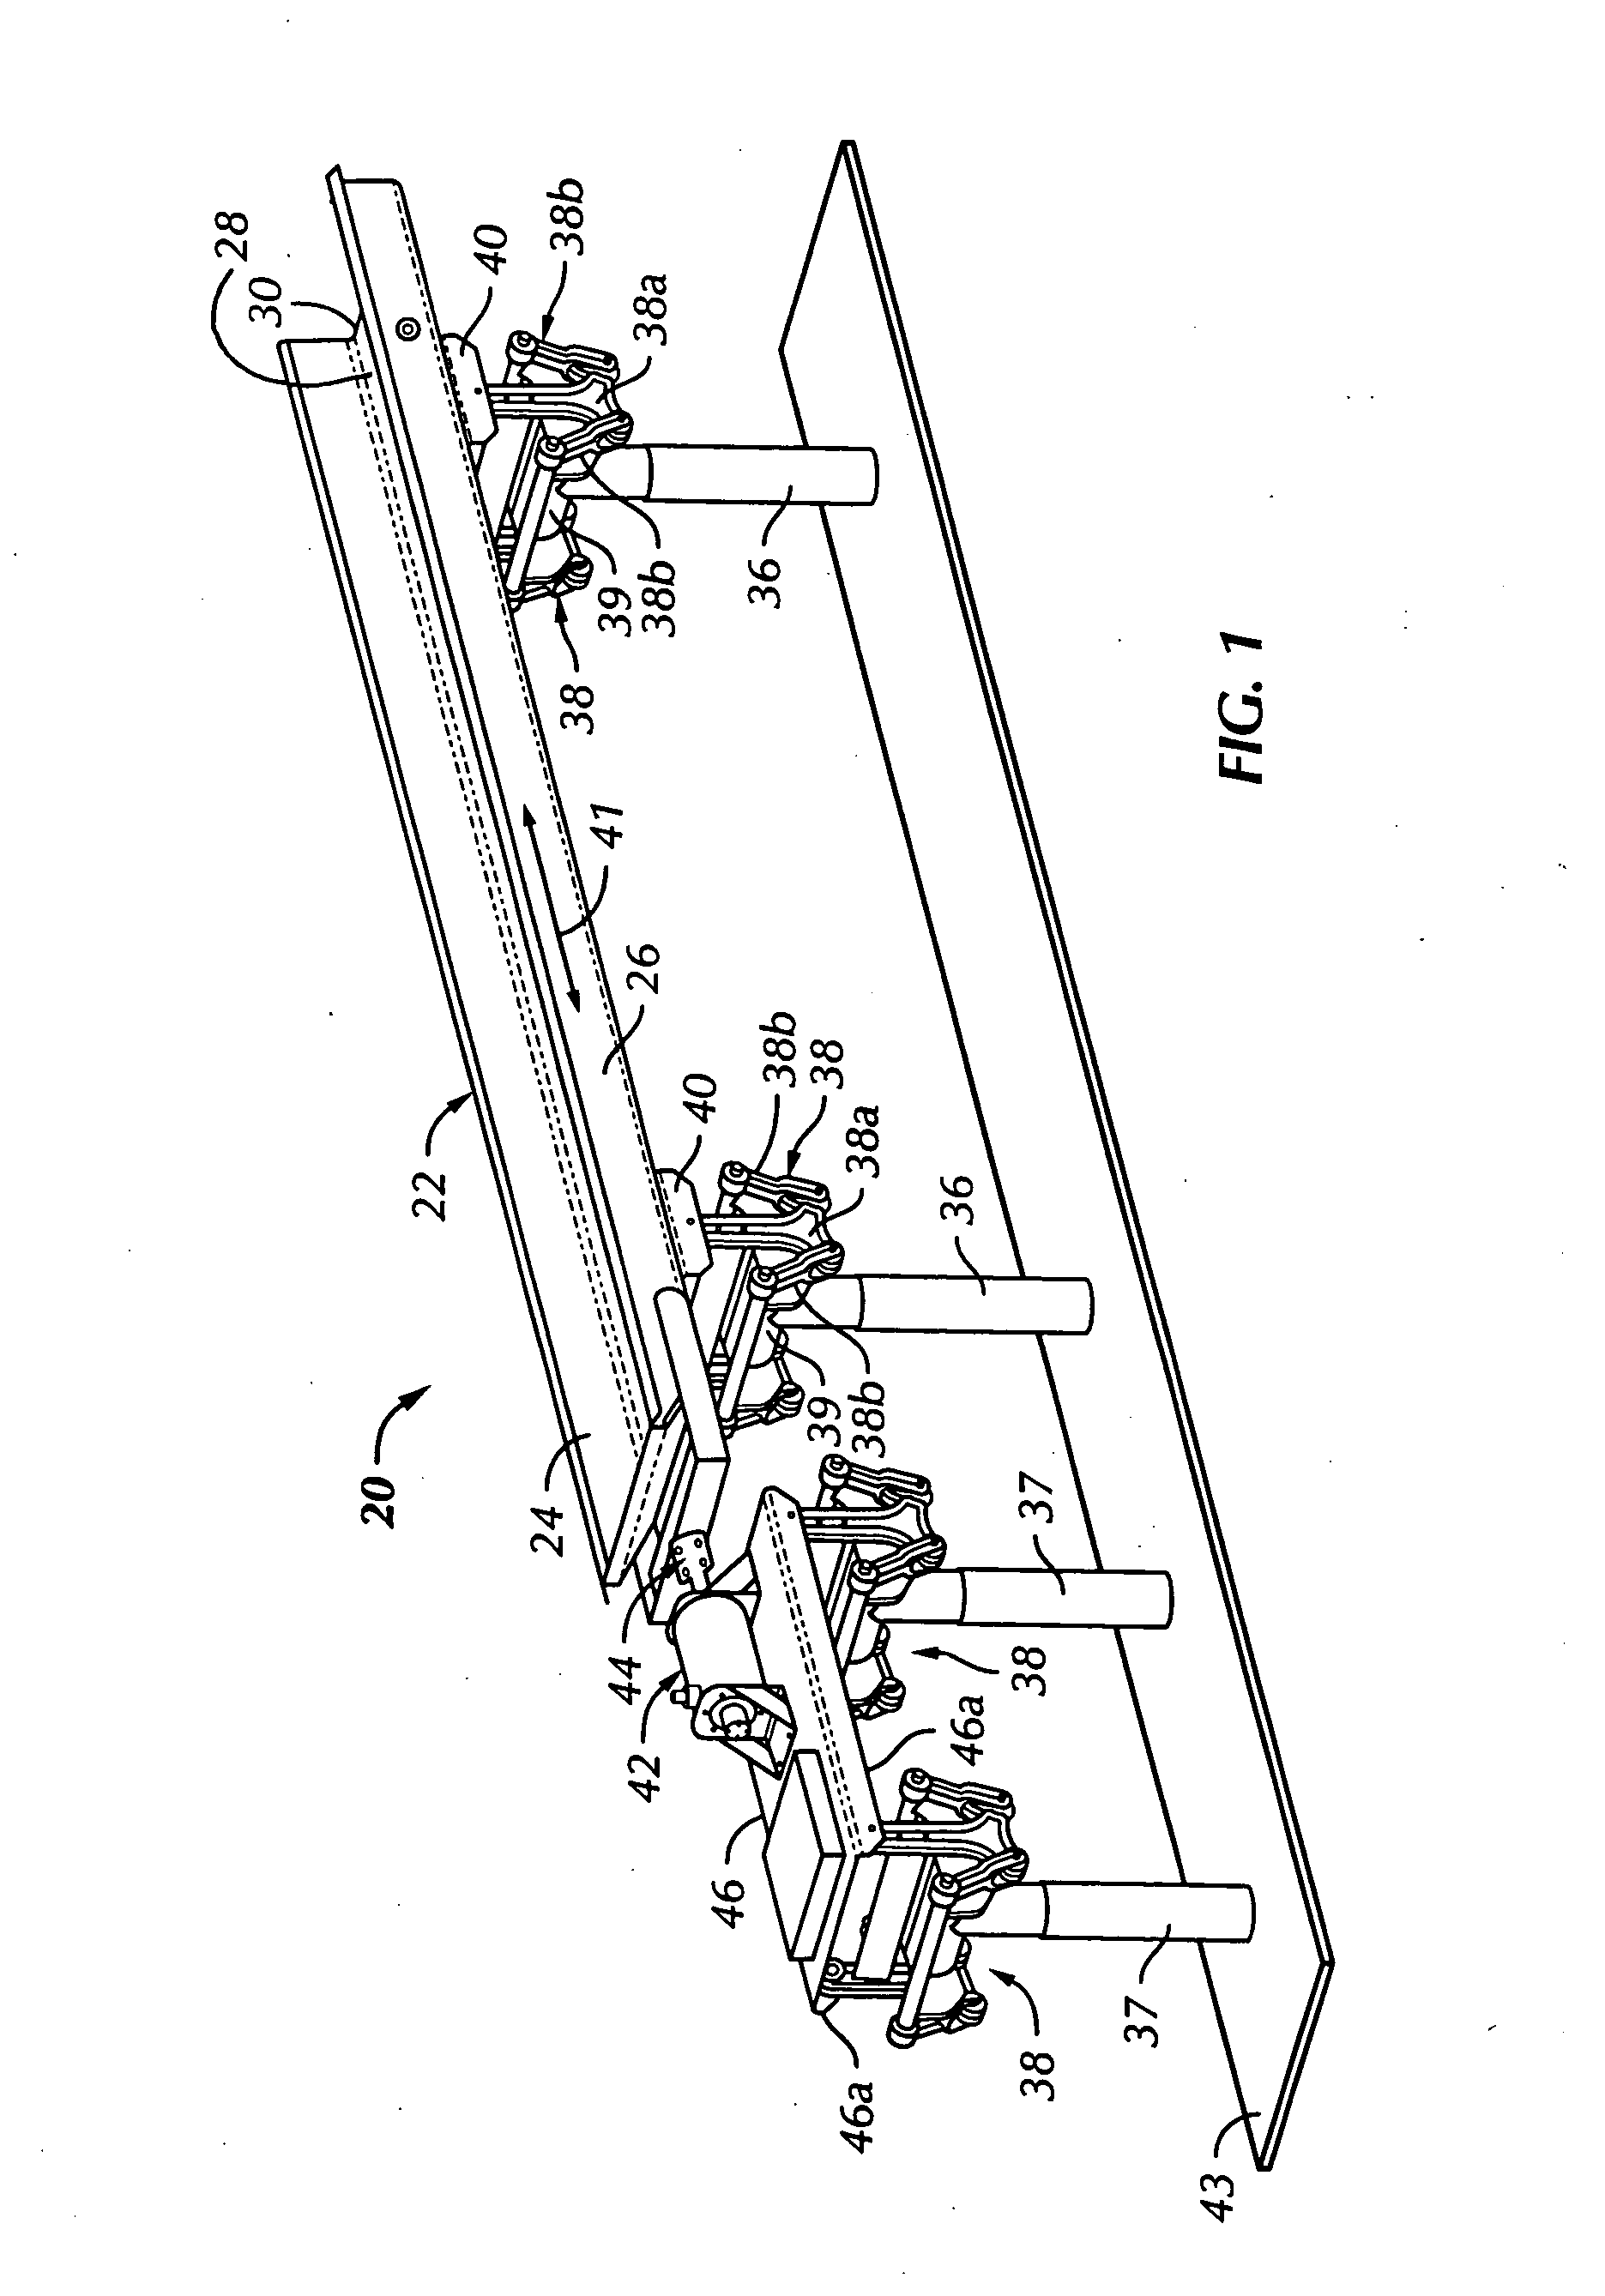 Reciprocating conveyor system and method